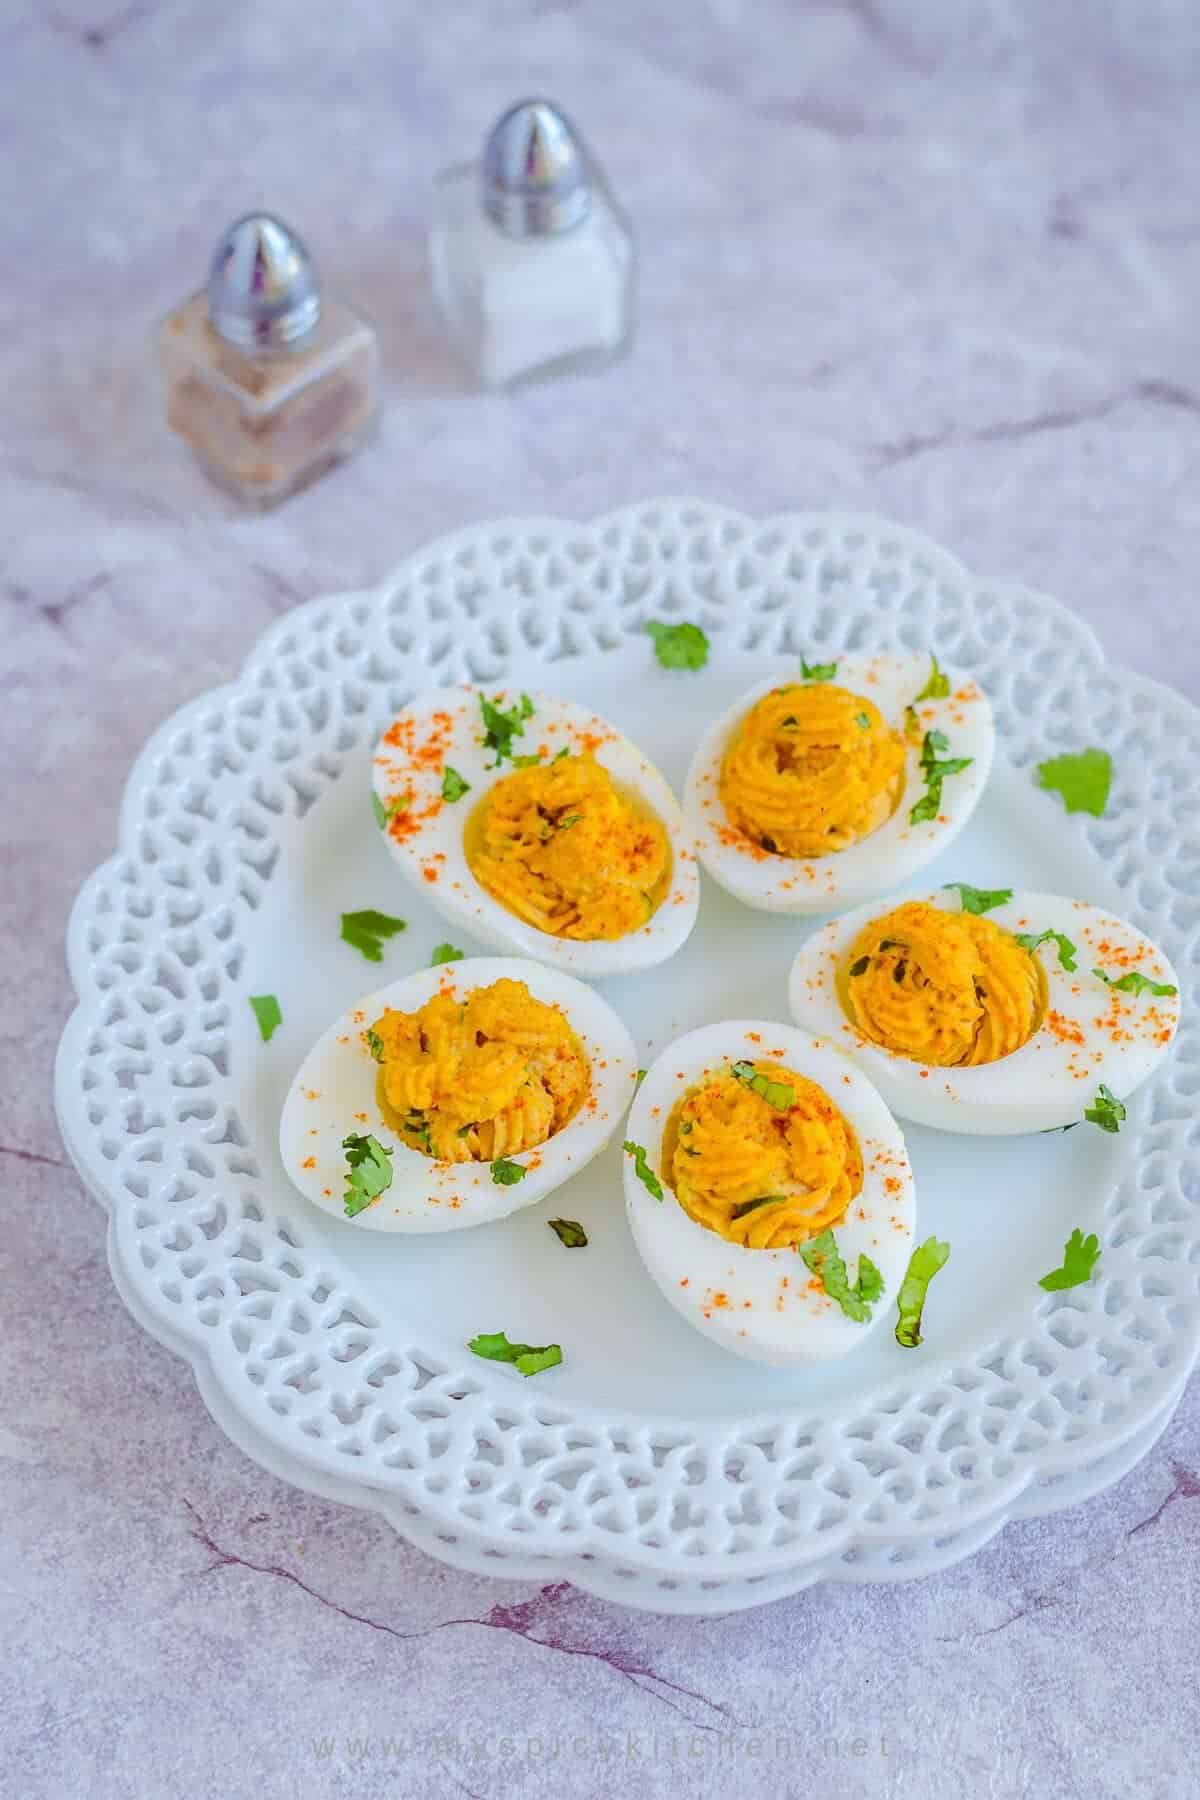 Plate of curried deviled eeggs.